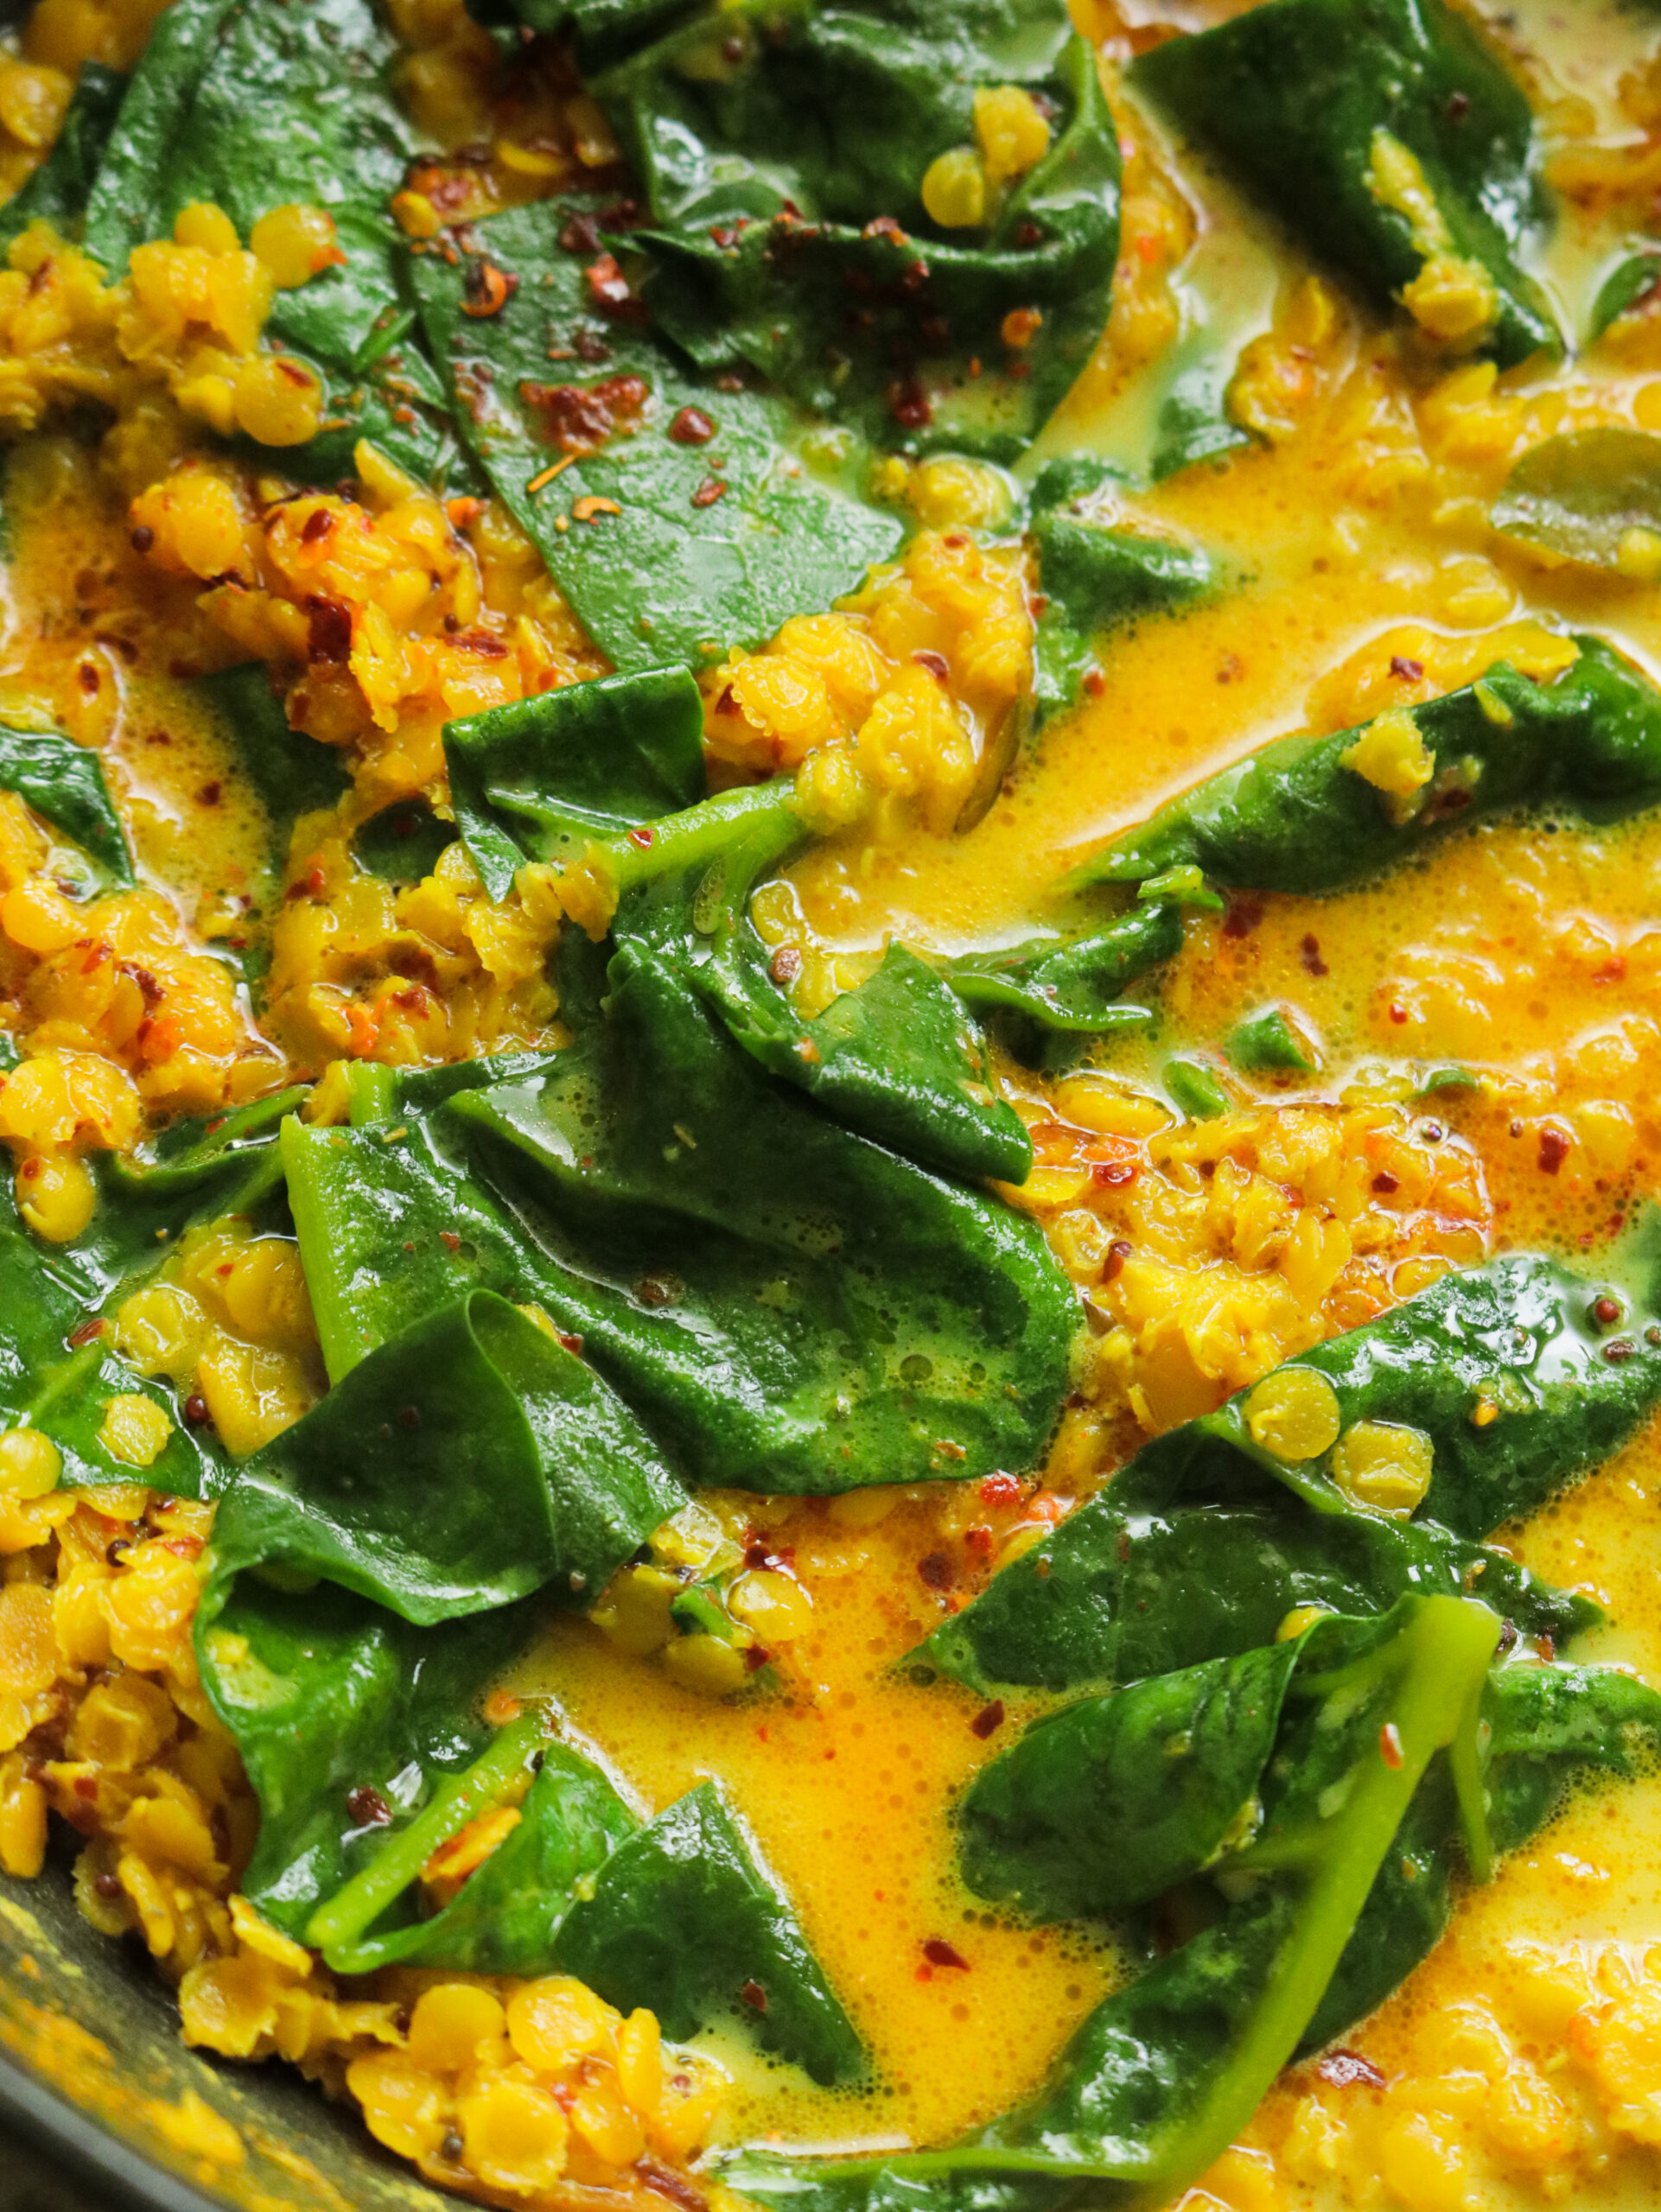 Sri Lankan Dhal(red lentil)spinach curry | ISLAND SMILE